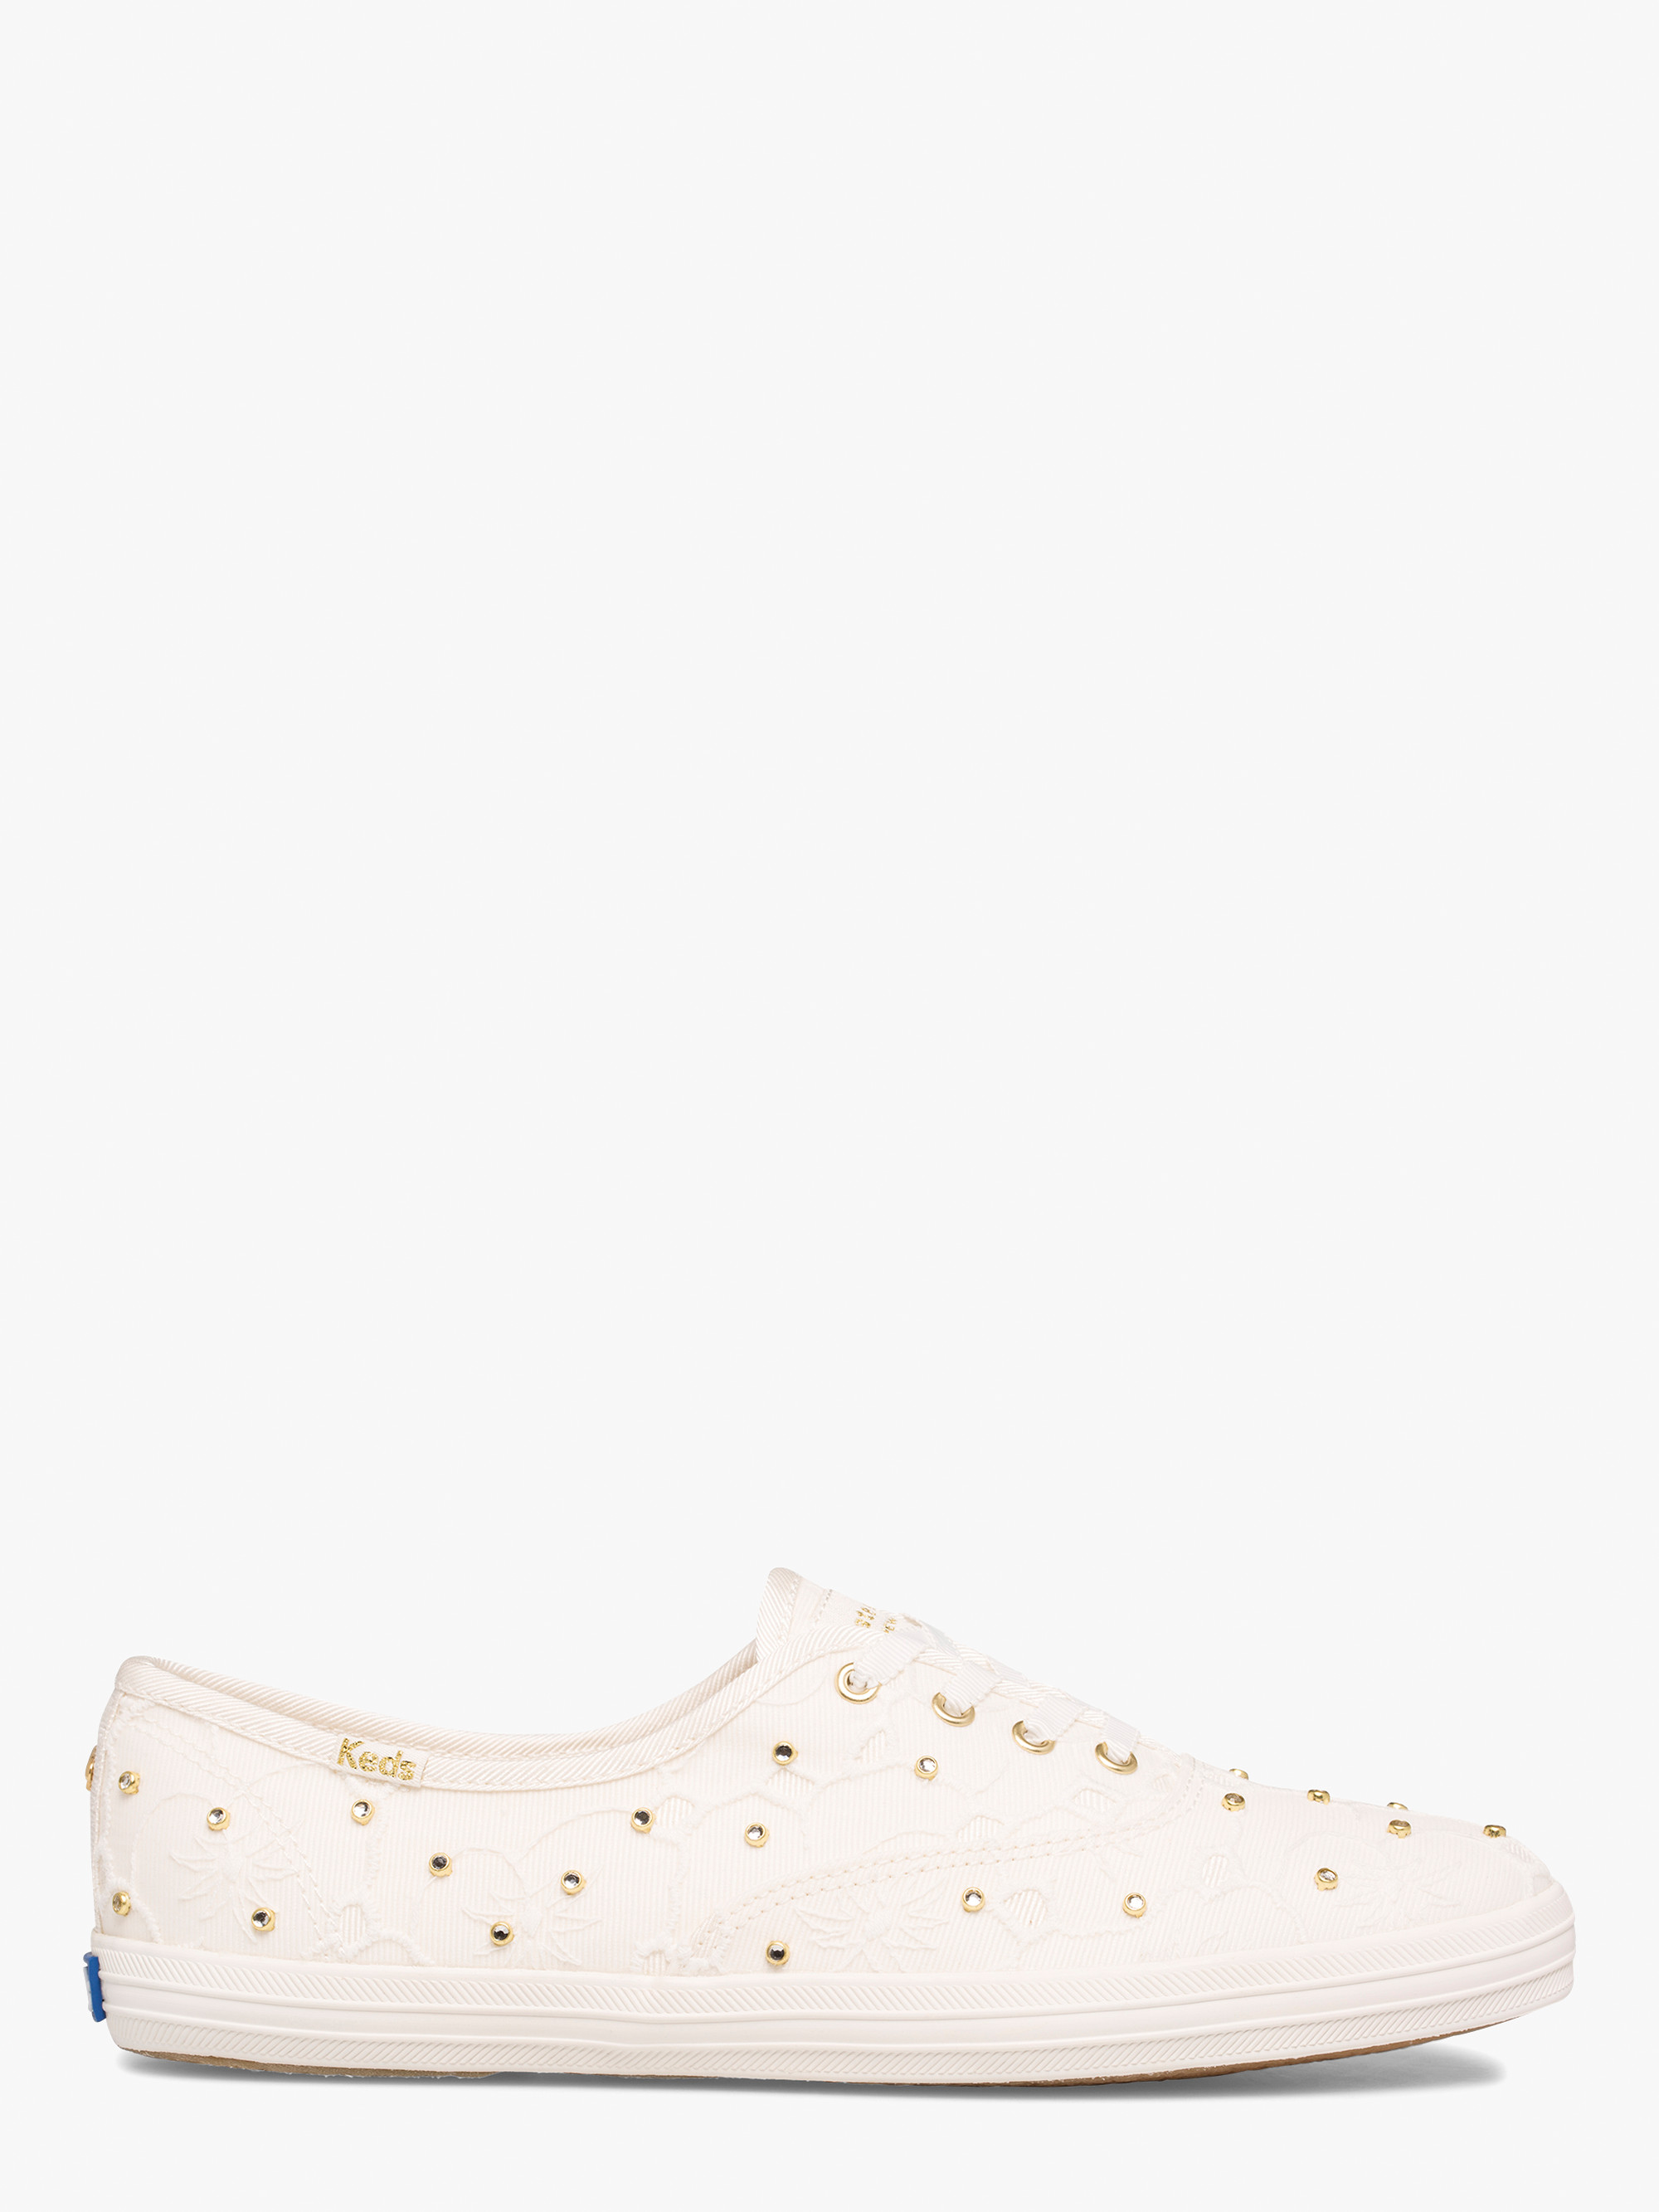 keds x kate spade new york champion bridal lace sneakers